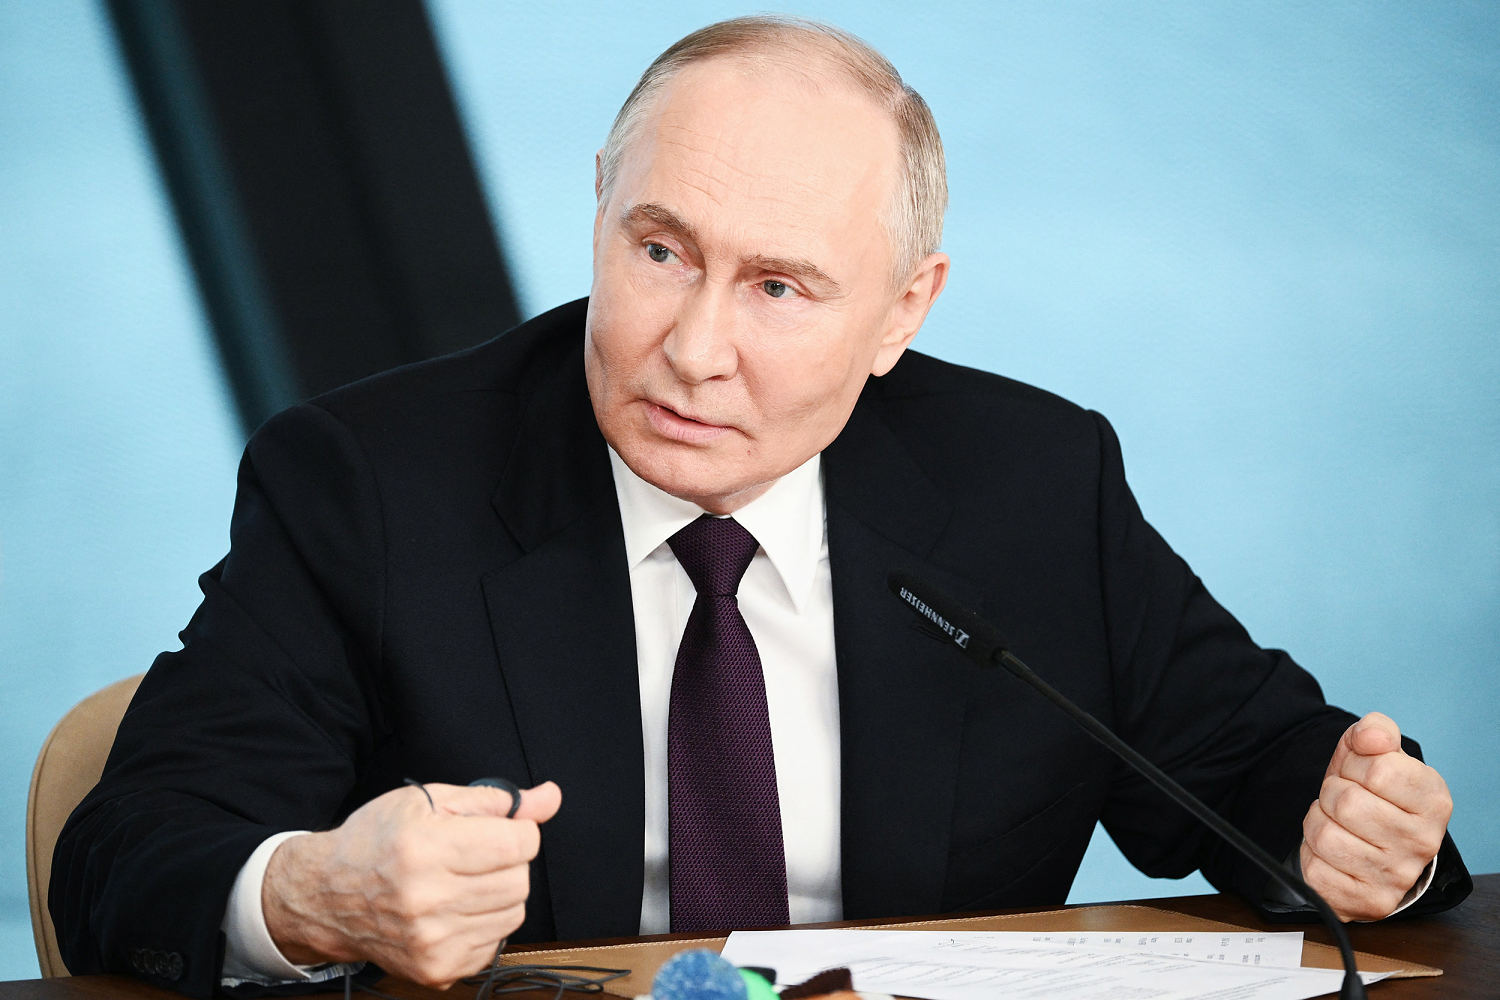 Putin warns he could provide weapons to attack the West and issues new nuclear threat